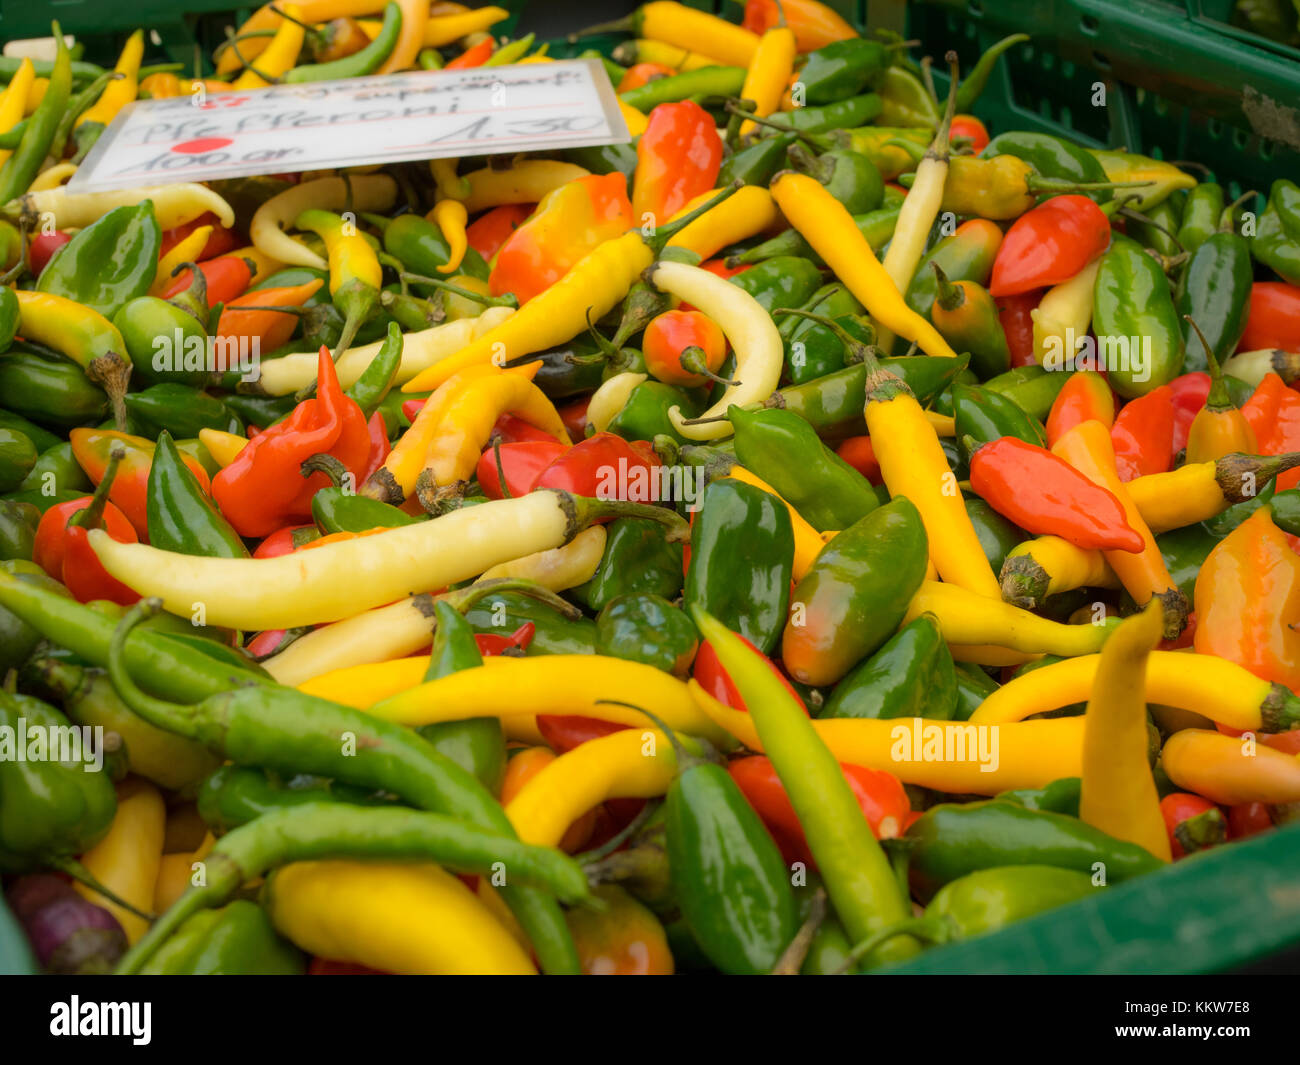 Hot pepper at market Stock Photo